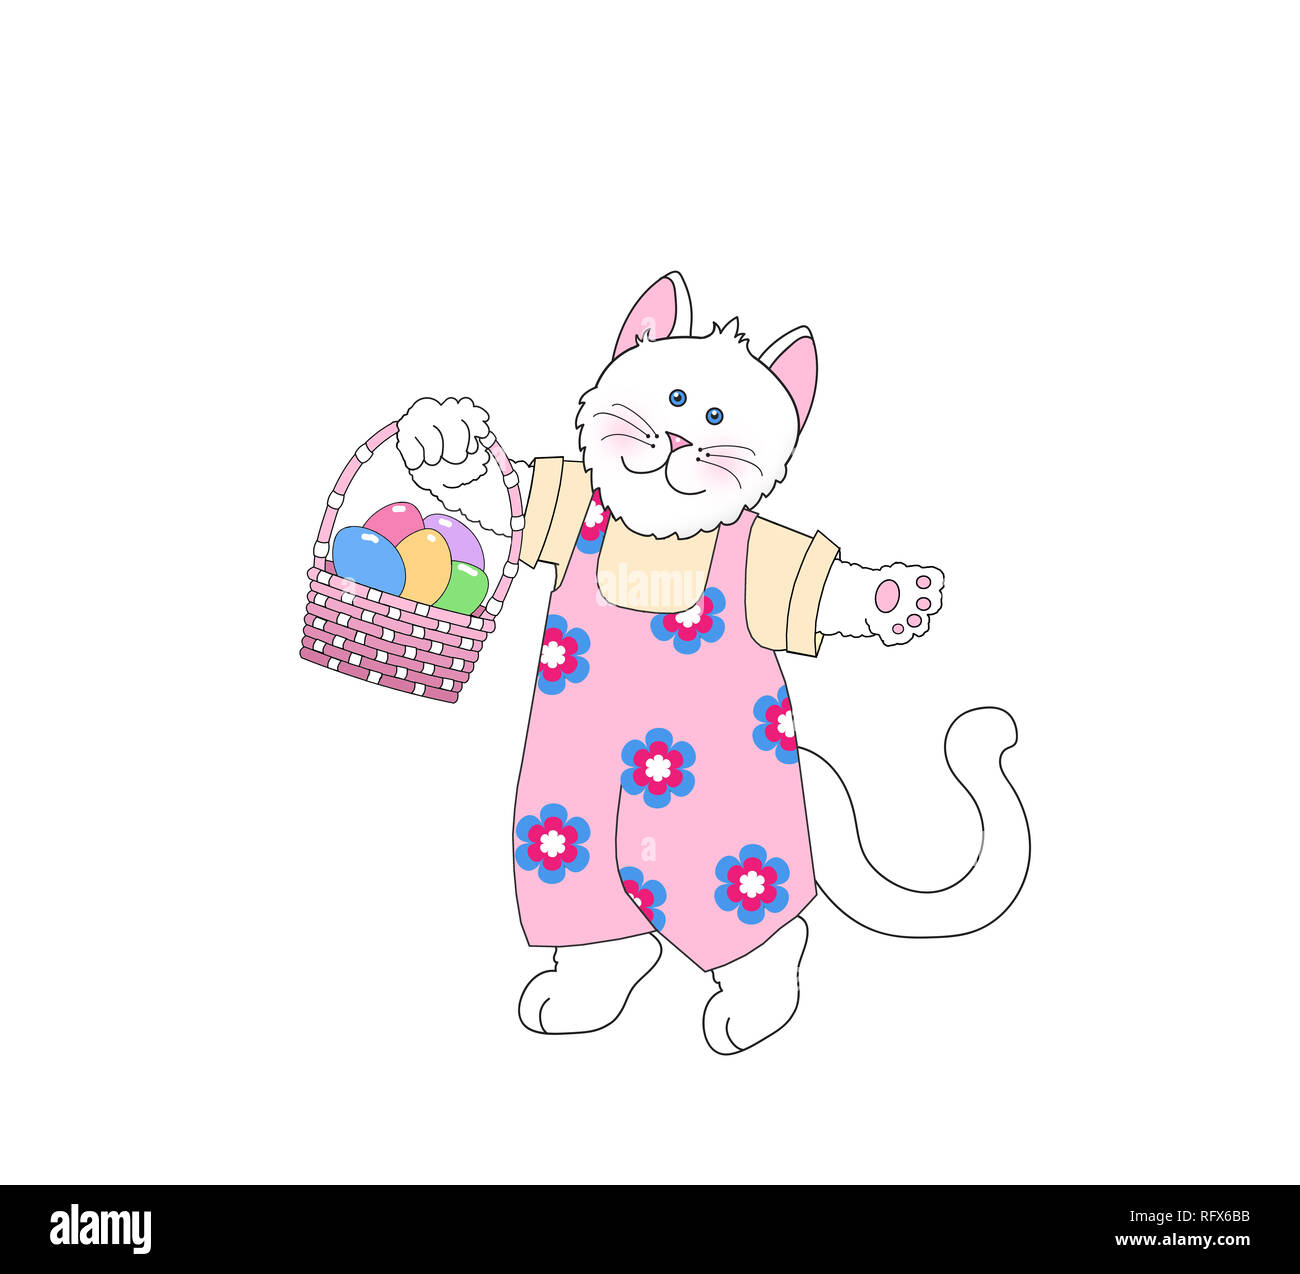 Illustration of a cute cat/kitten wearing clothes and carrying an Easter basket on a white background Stock Photo